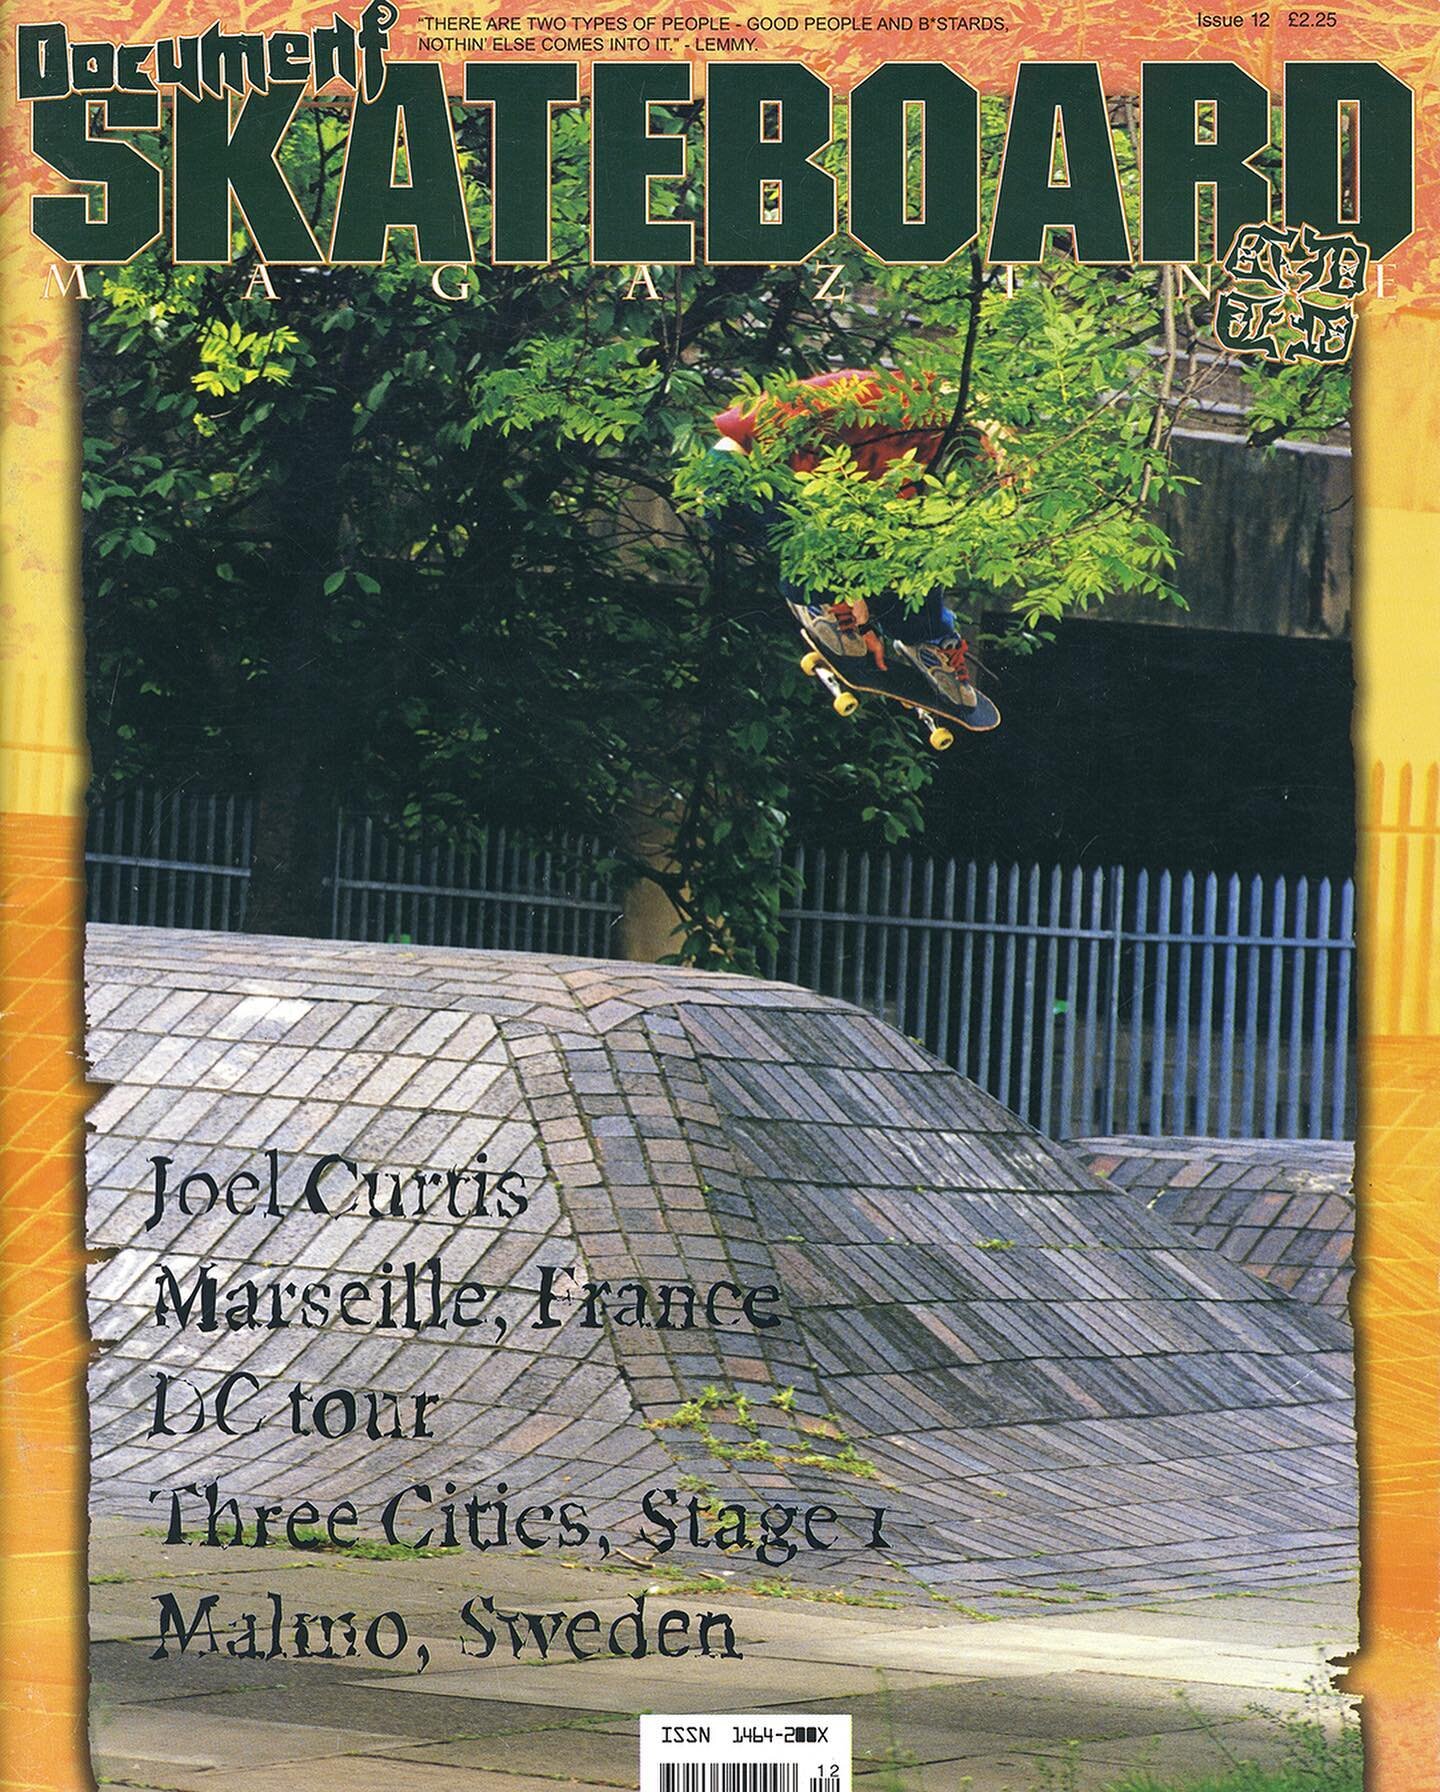 A throwback to a Nottingham cover - @reesthepeace thrusting a backside grab over Broadmarsh Banks for issue 12 of Document Skateboard Magazine, June 2000. 📸 @skingphoto. ⁣
⁣
Also inside are inspirations &amp; friends of Skate Nottingham @gustaveden 